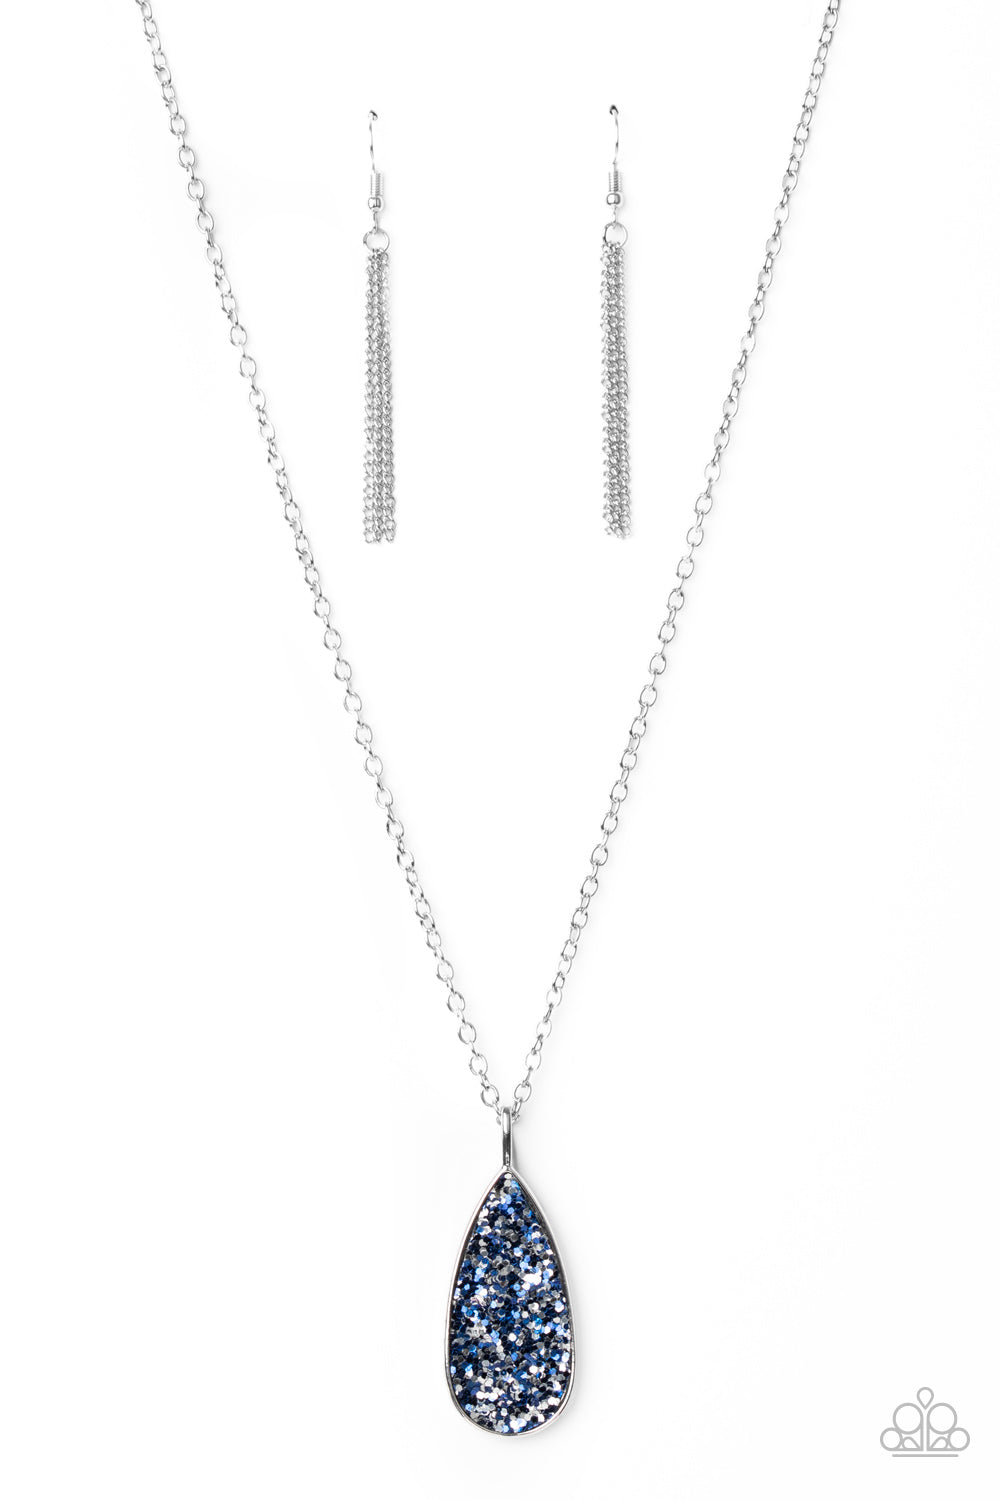 Daily Dose of Sparkle - Blue necklace 1694